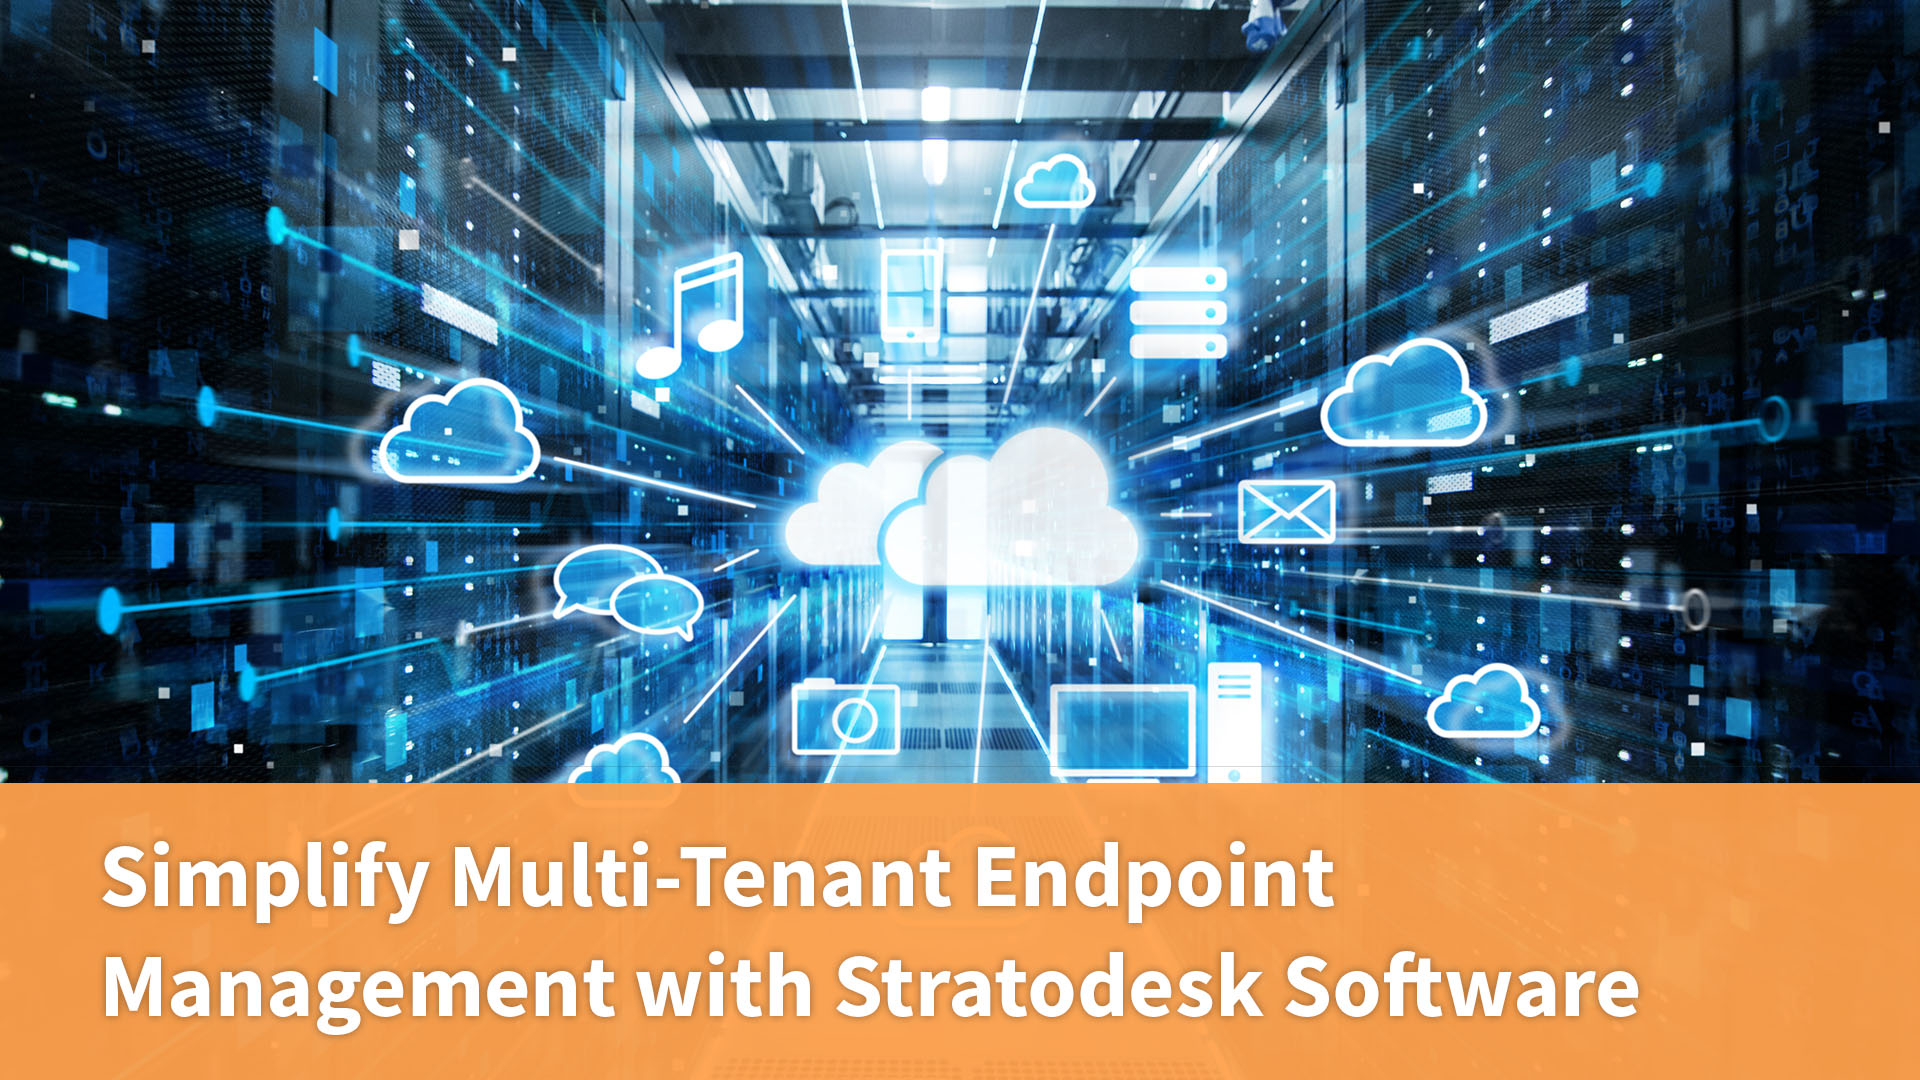 Simplify Multi-Tenant Endpoint Management with Stratodesk Software